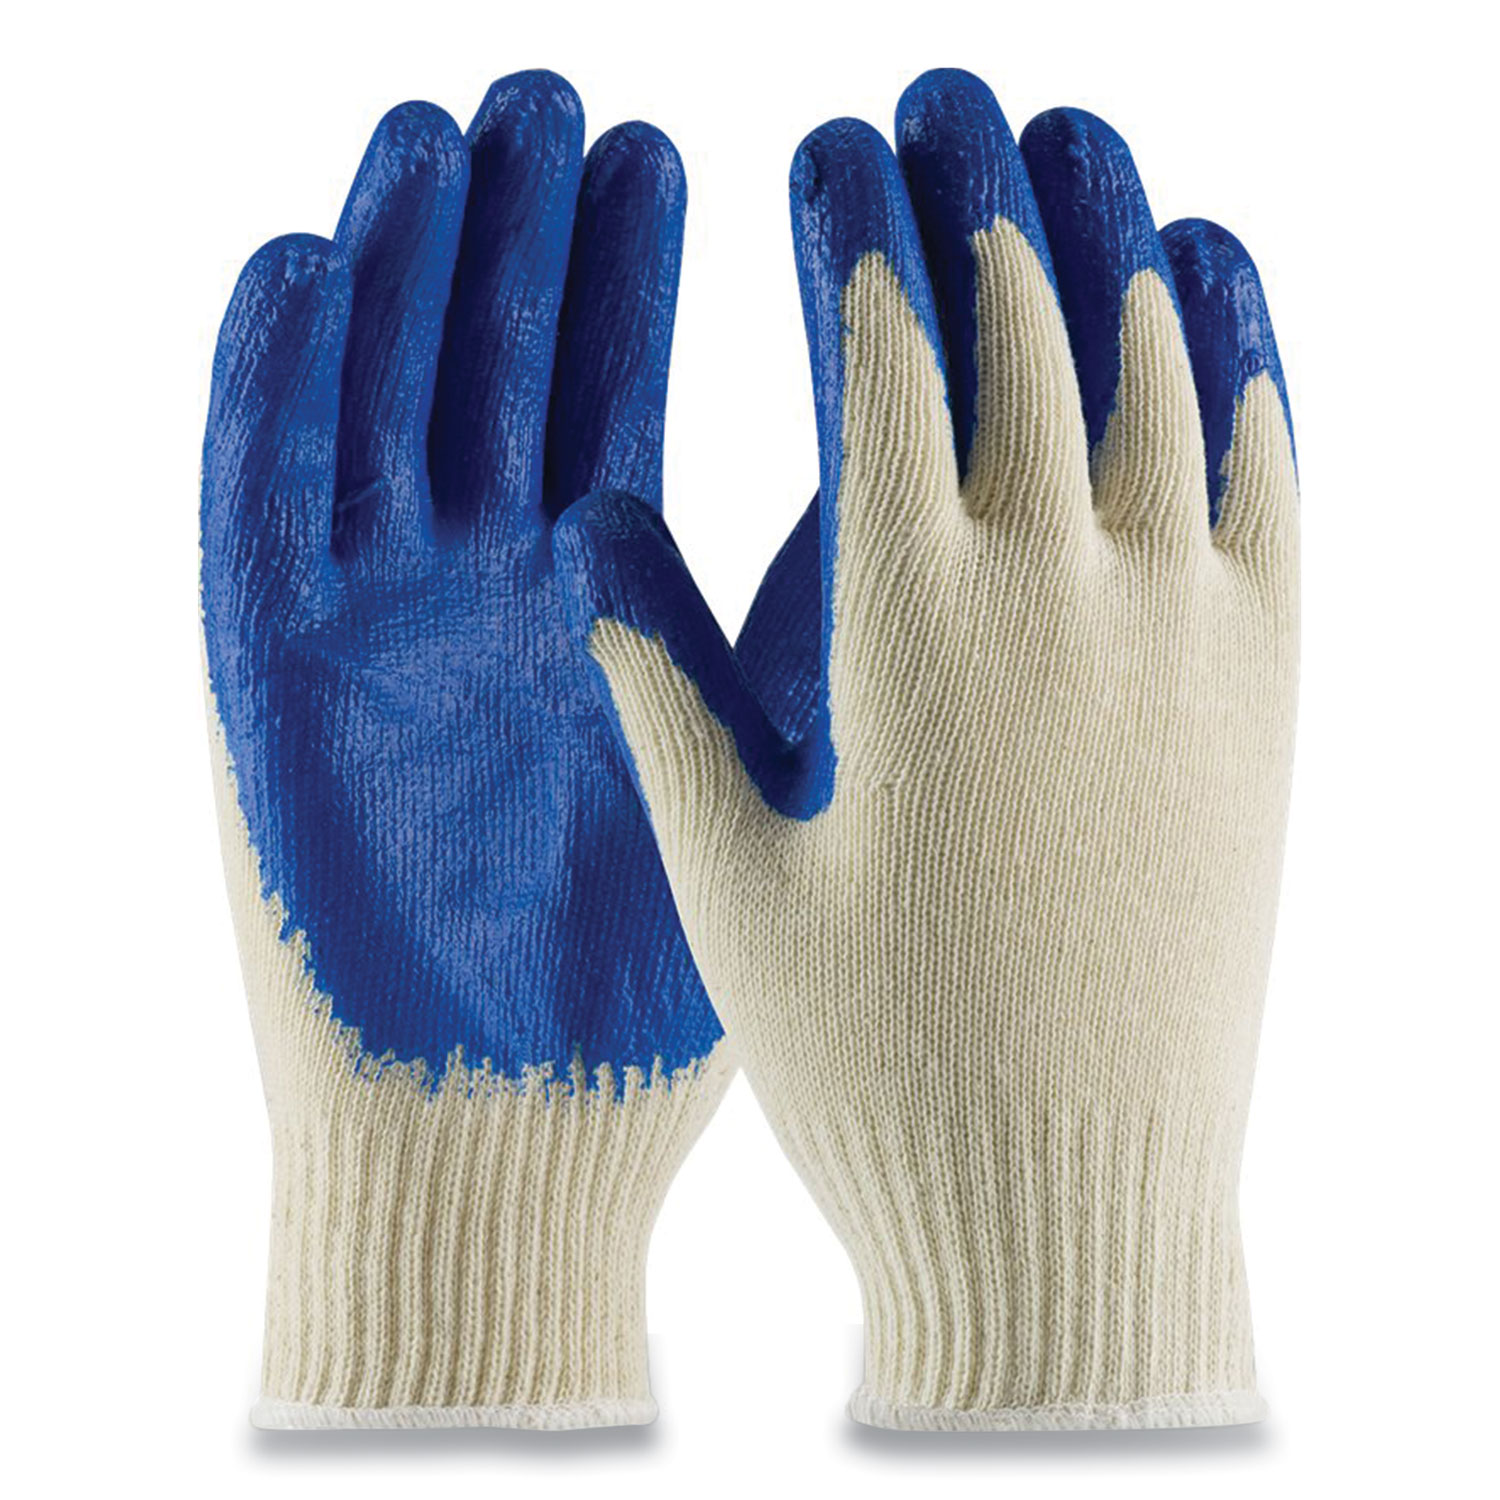 Seamless Knit Cotton/Polyester Gloves, Regular Grade, Small, Natural/Blue, 12 Pairs